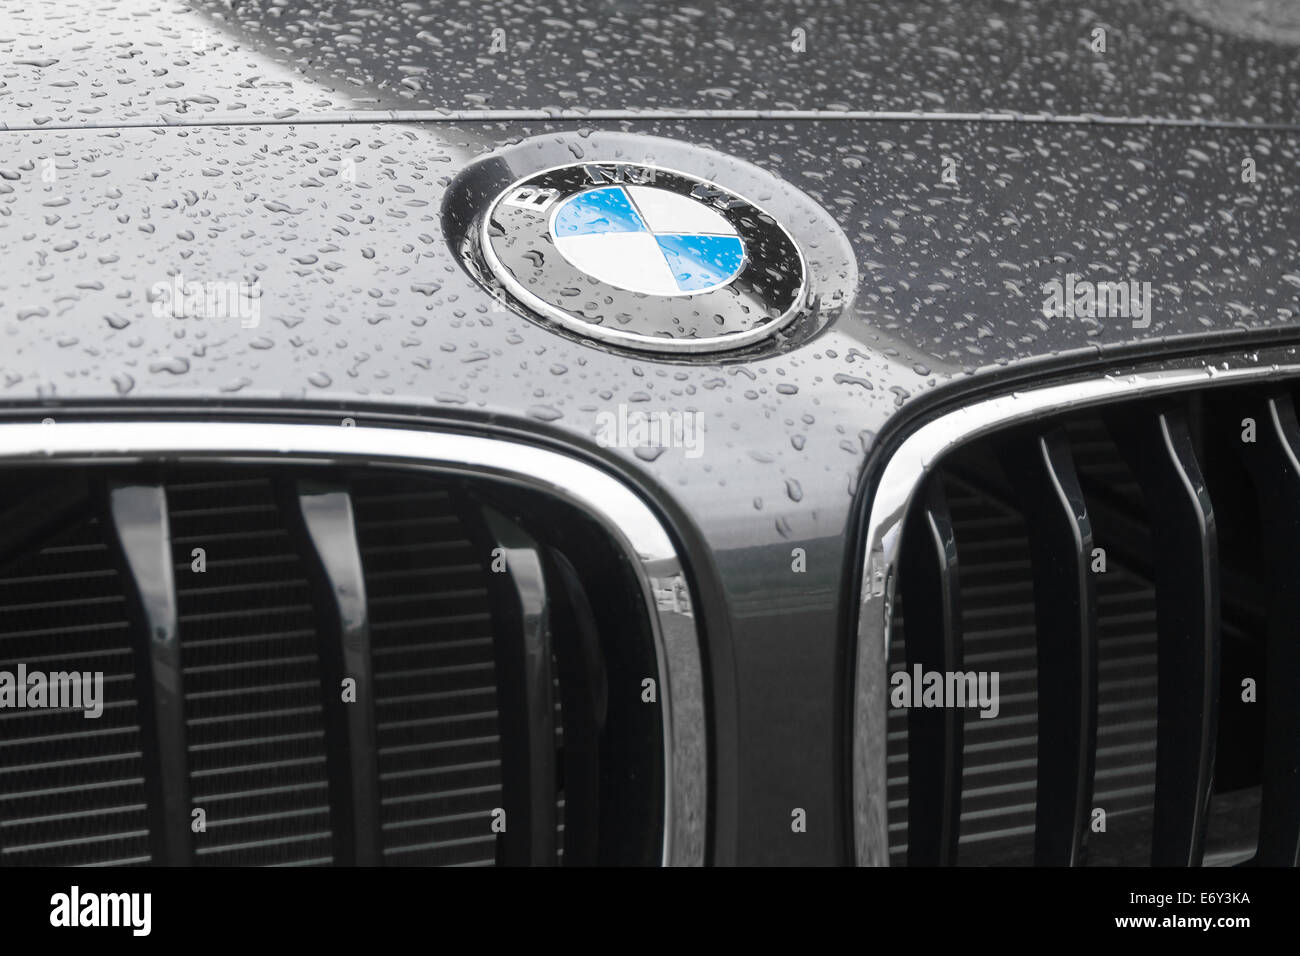 MUNICH, GERMANY - AUGUST 9, 2014: BMW logo on wet surface of hood of new model elite deluxe car. Stock Photo